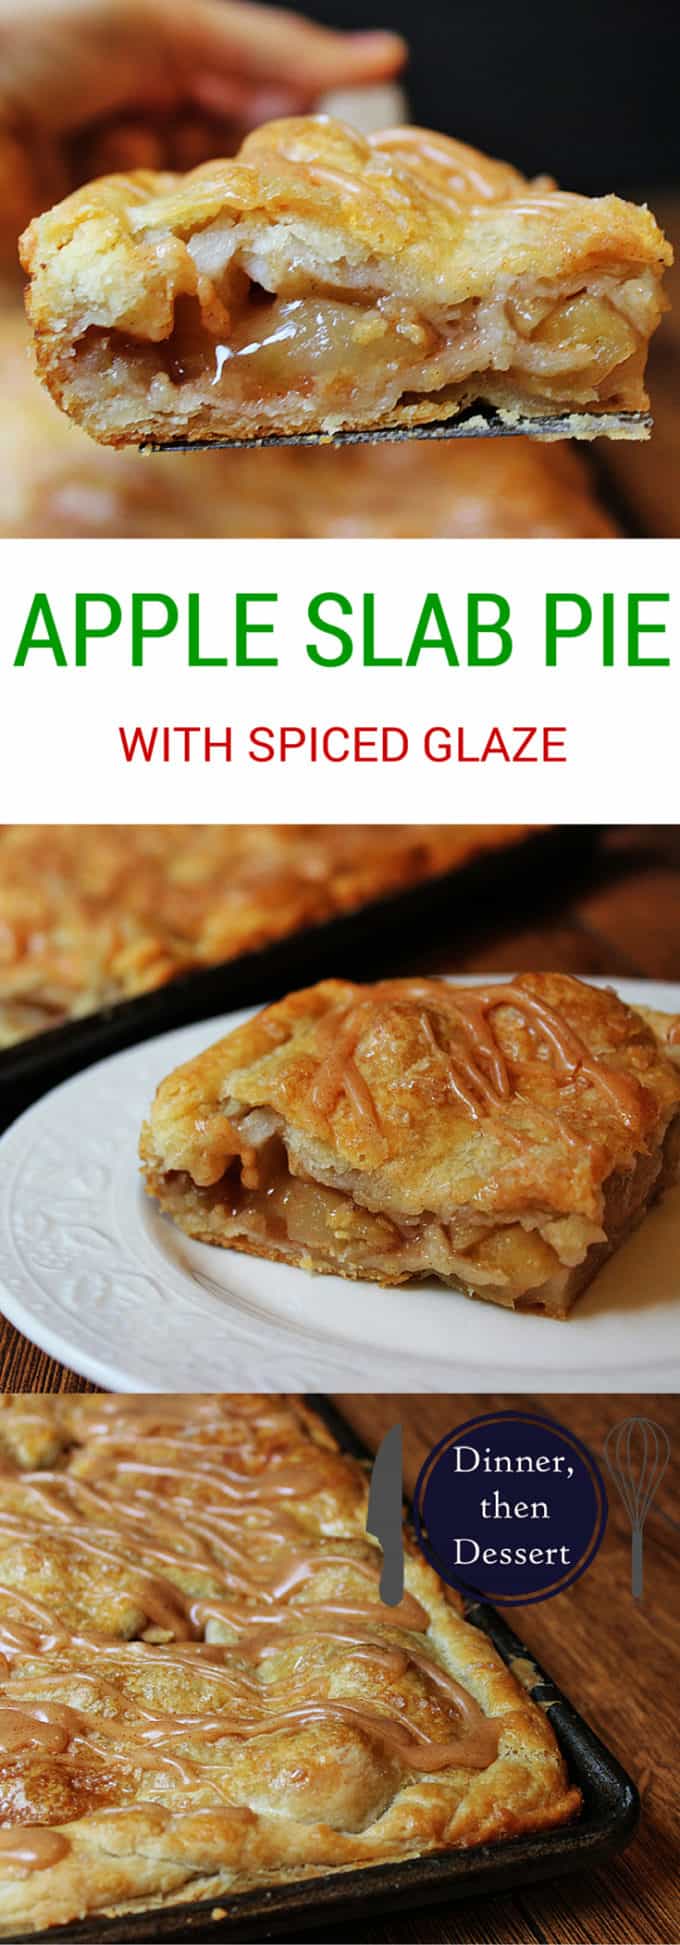 A flaky crust, tender apples, warm spices, it's a delicious handheld pie in slab form, which means you get more crust per bite! It is topped with all the flavors in the pie because it uses all the leftover spiced liquids from the apples!